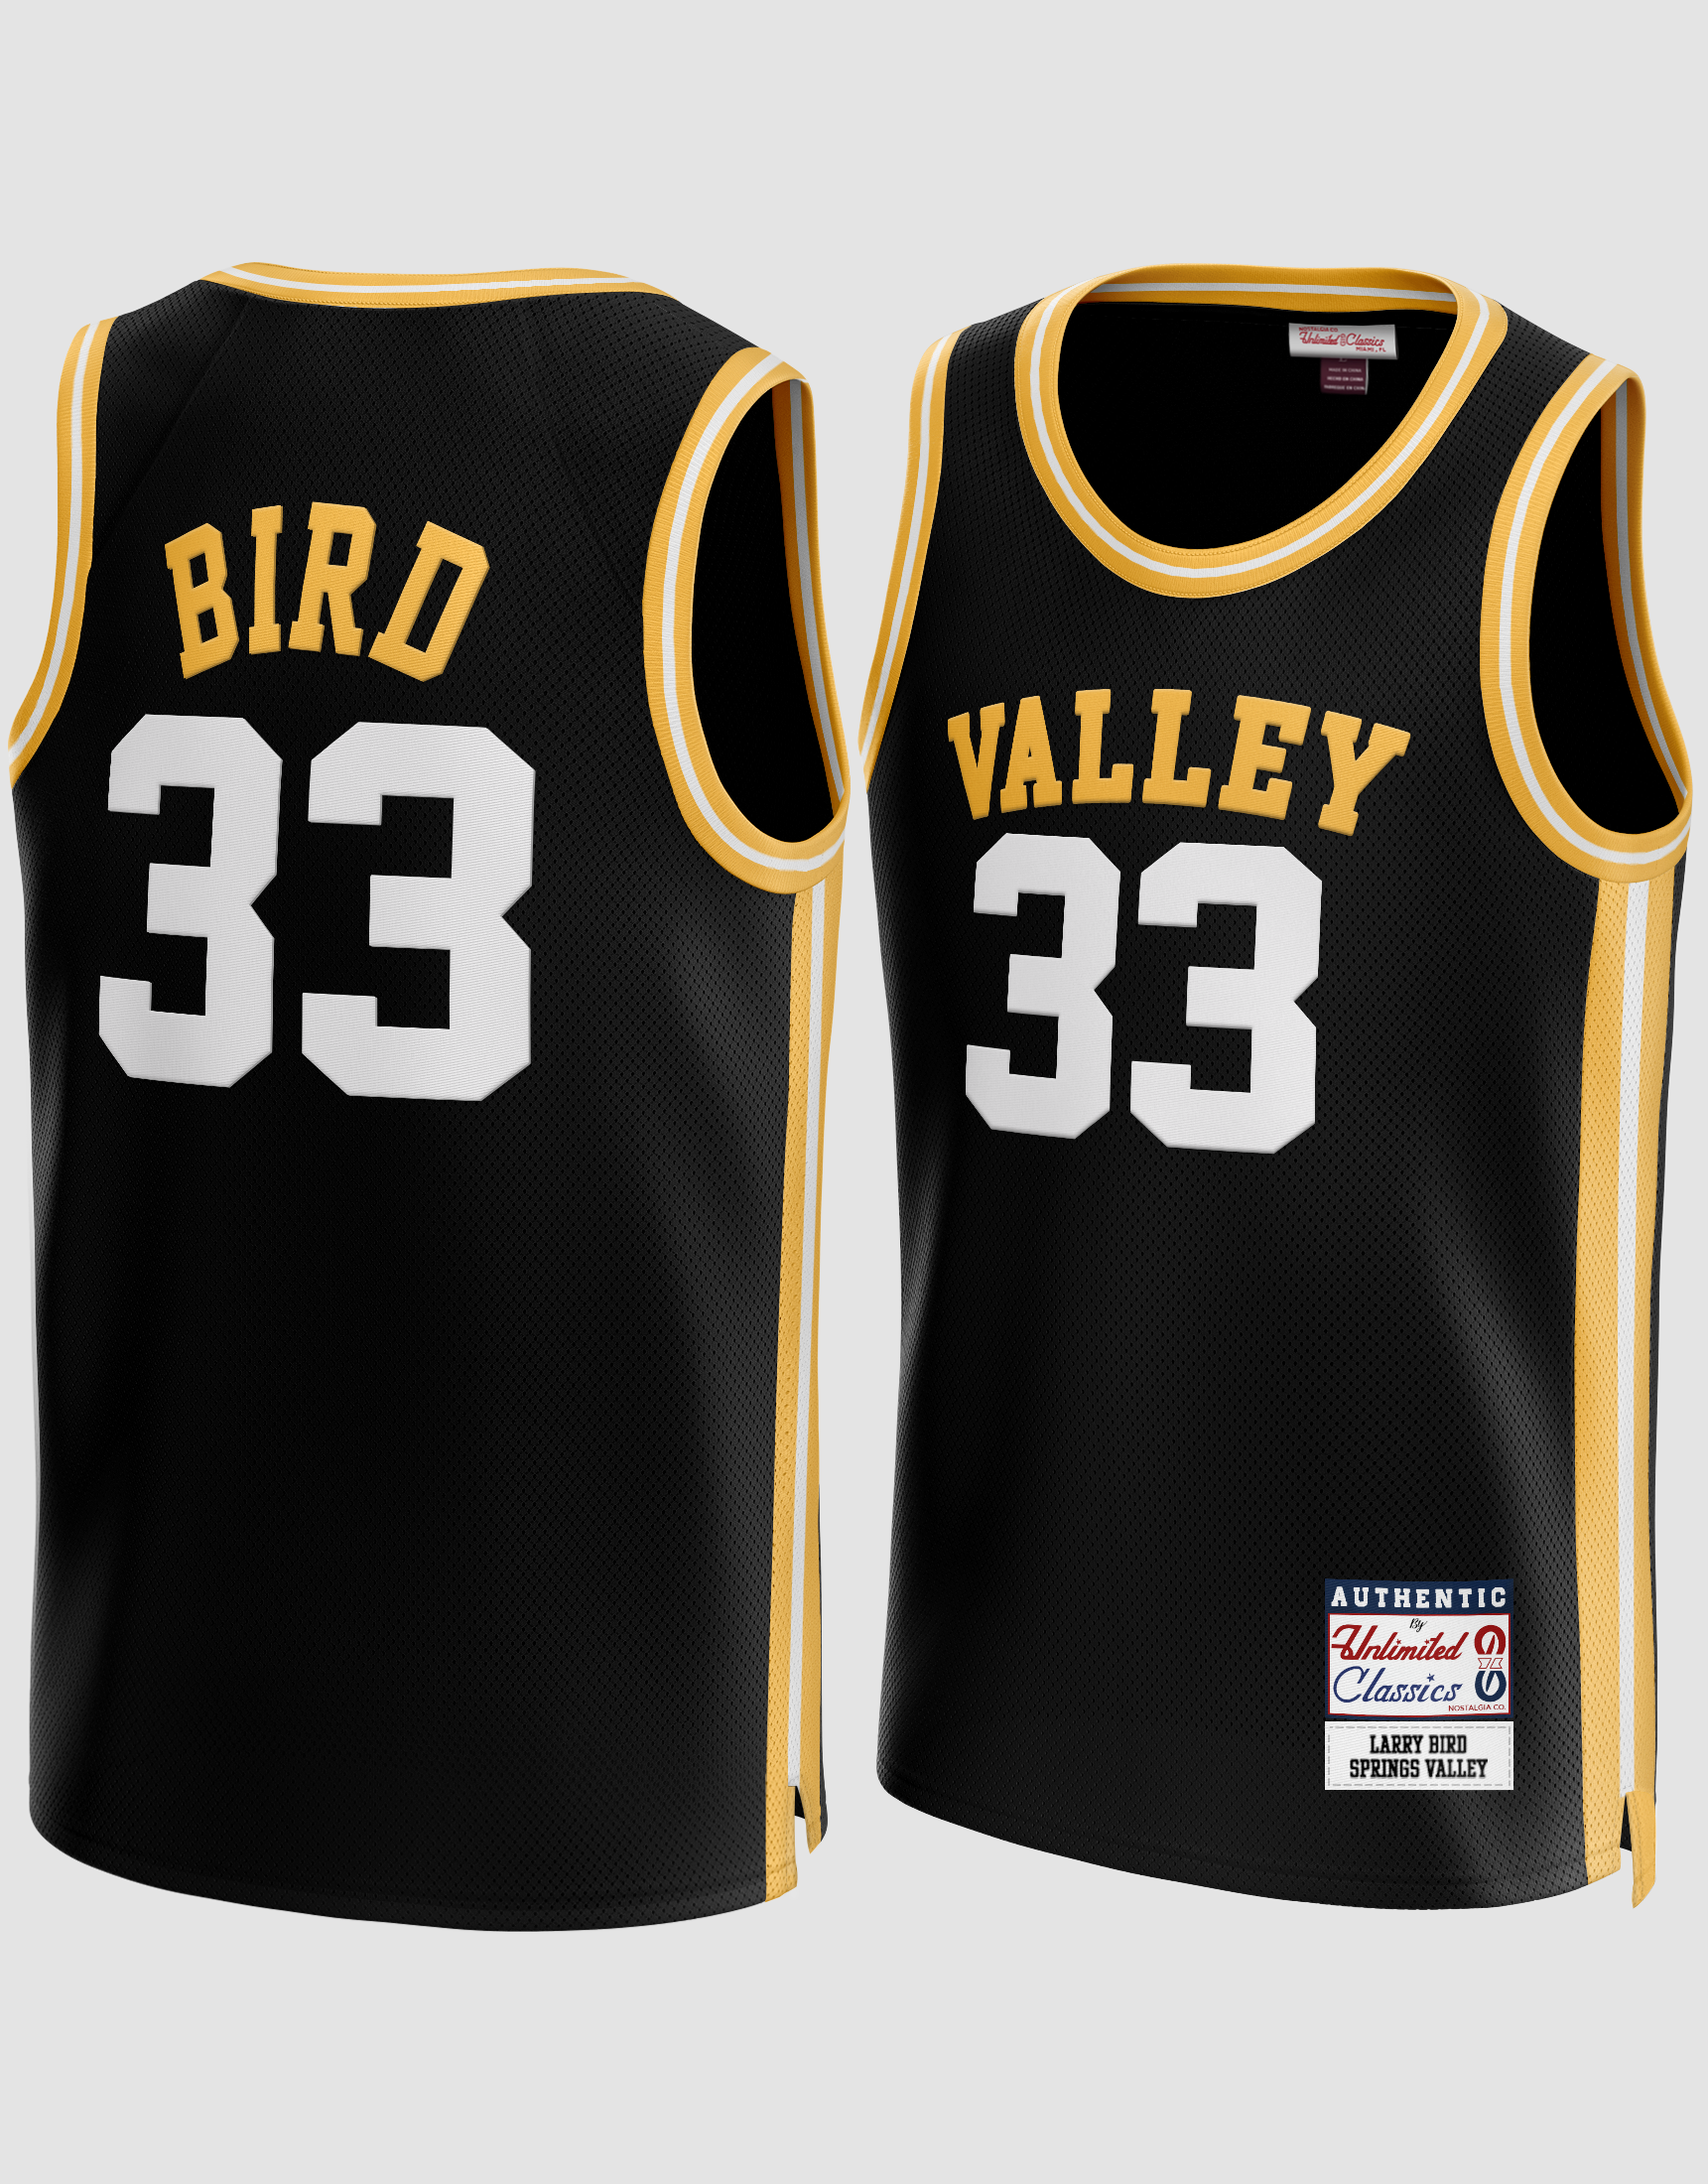 Unlimited Classics Larry Bird #33 Springs Valley Basketball Jersey L